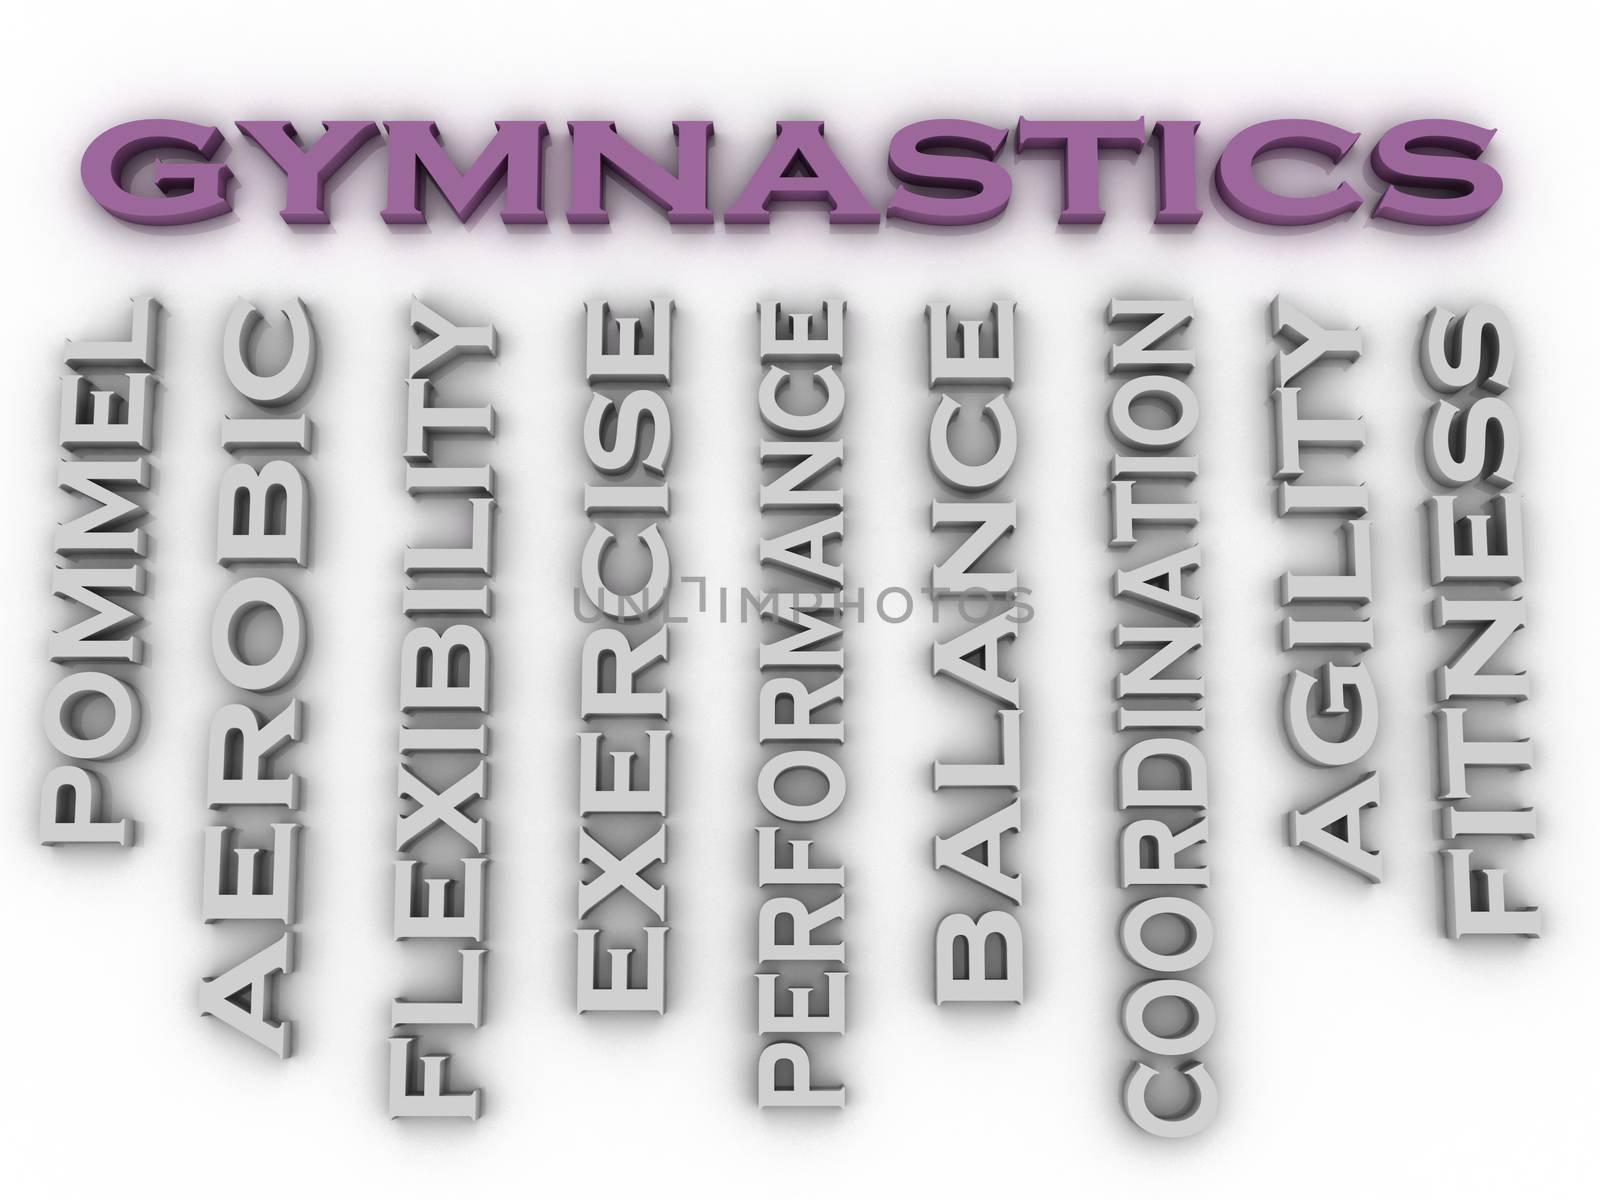 3d image Gymnastics issues concept word cloud background by dacasdo